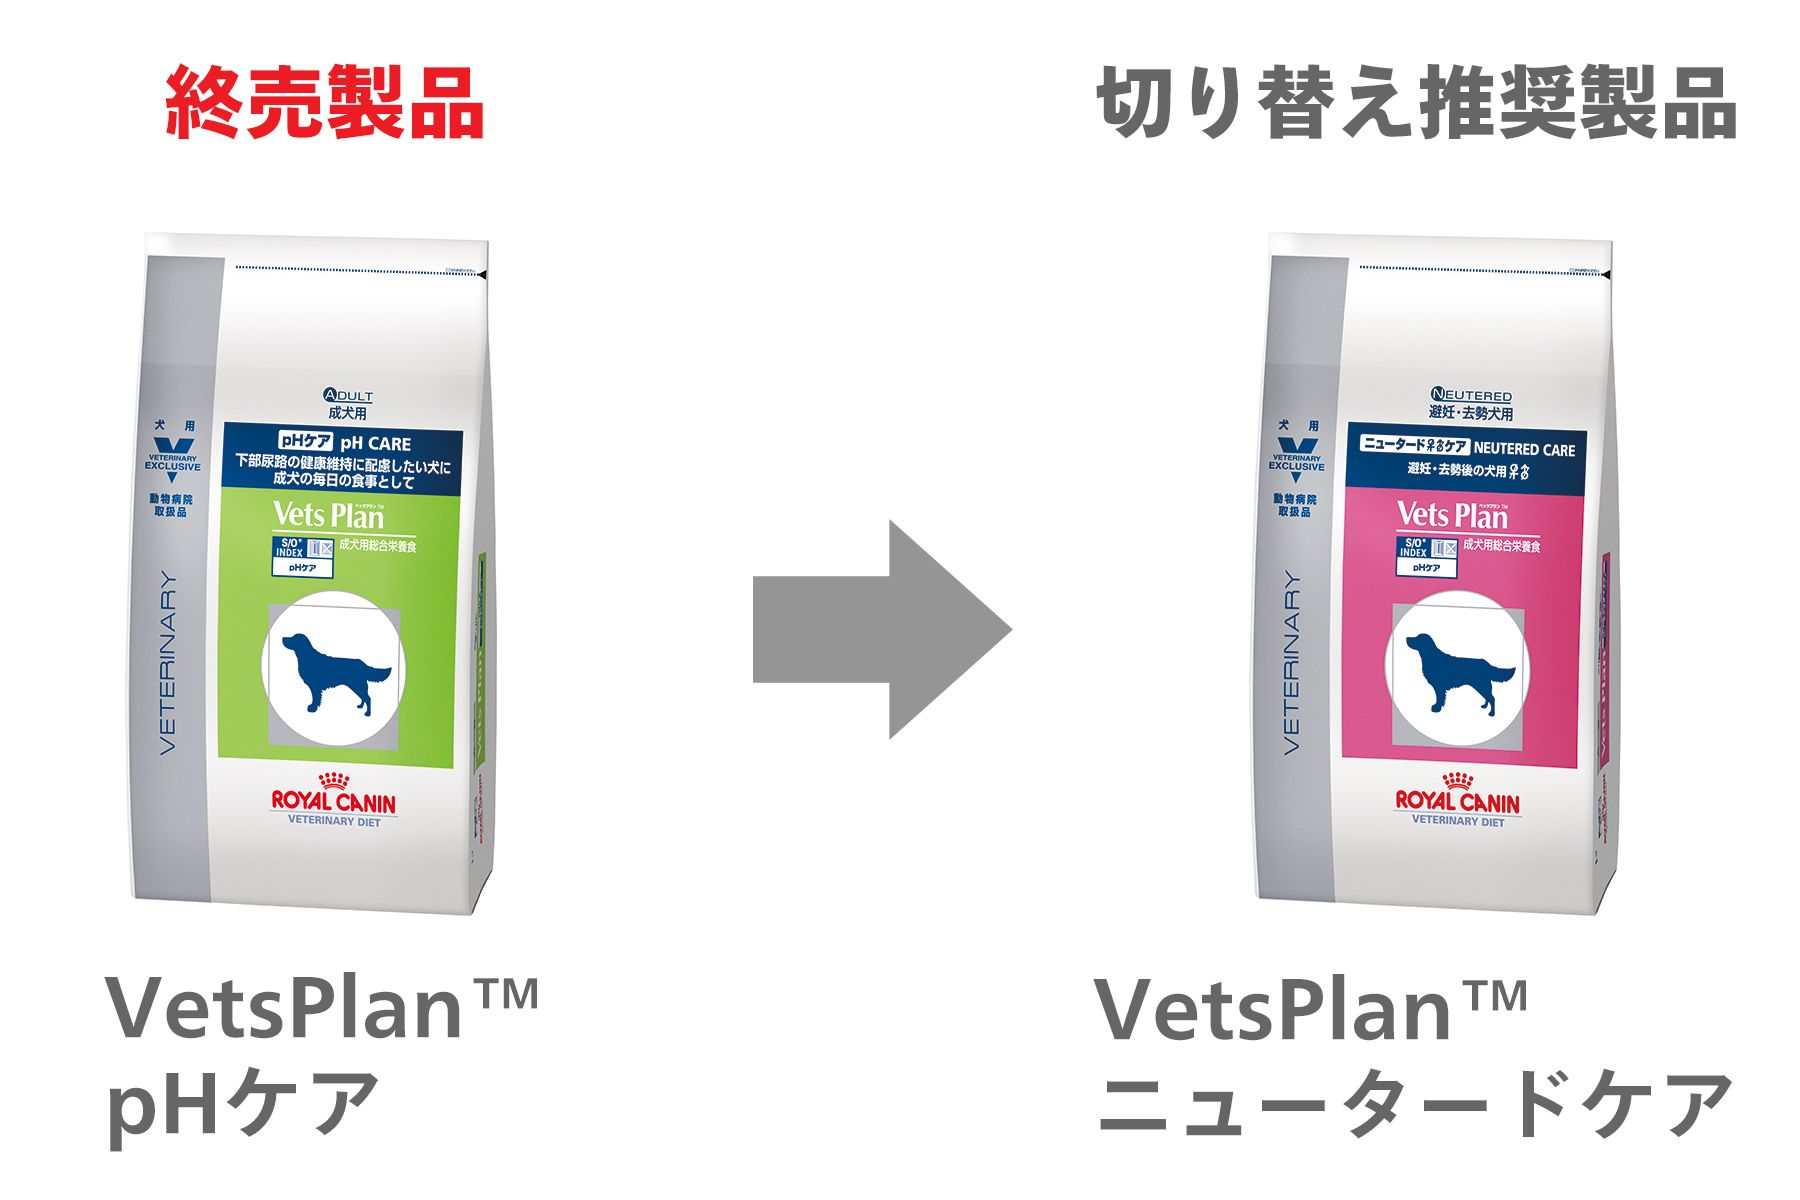 281-japan-local-vets-of-dog-ph-care-change